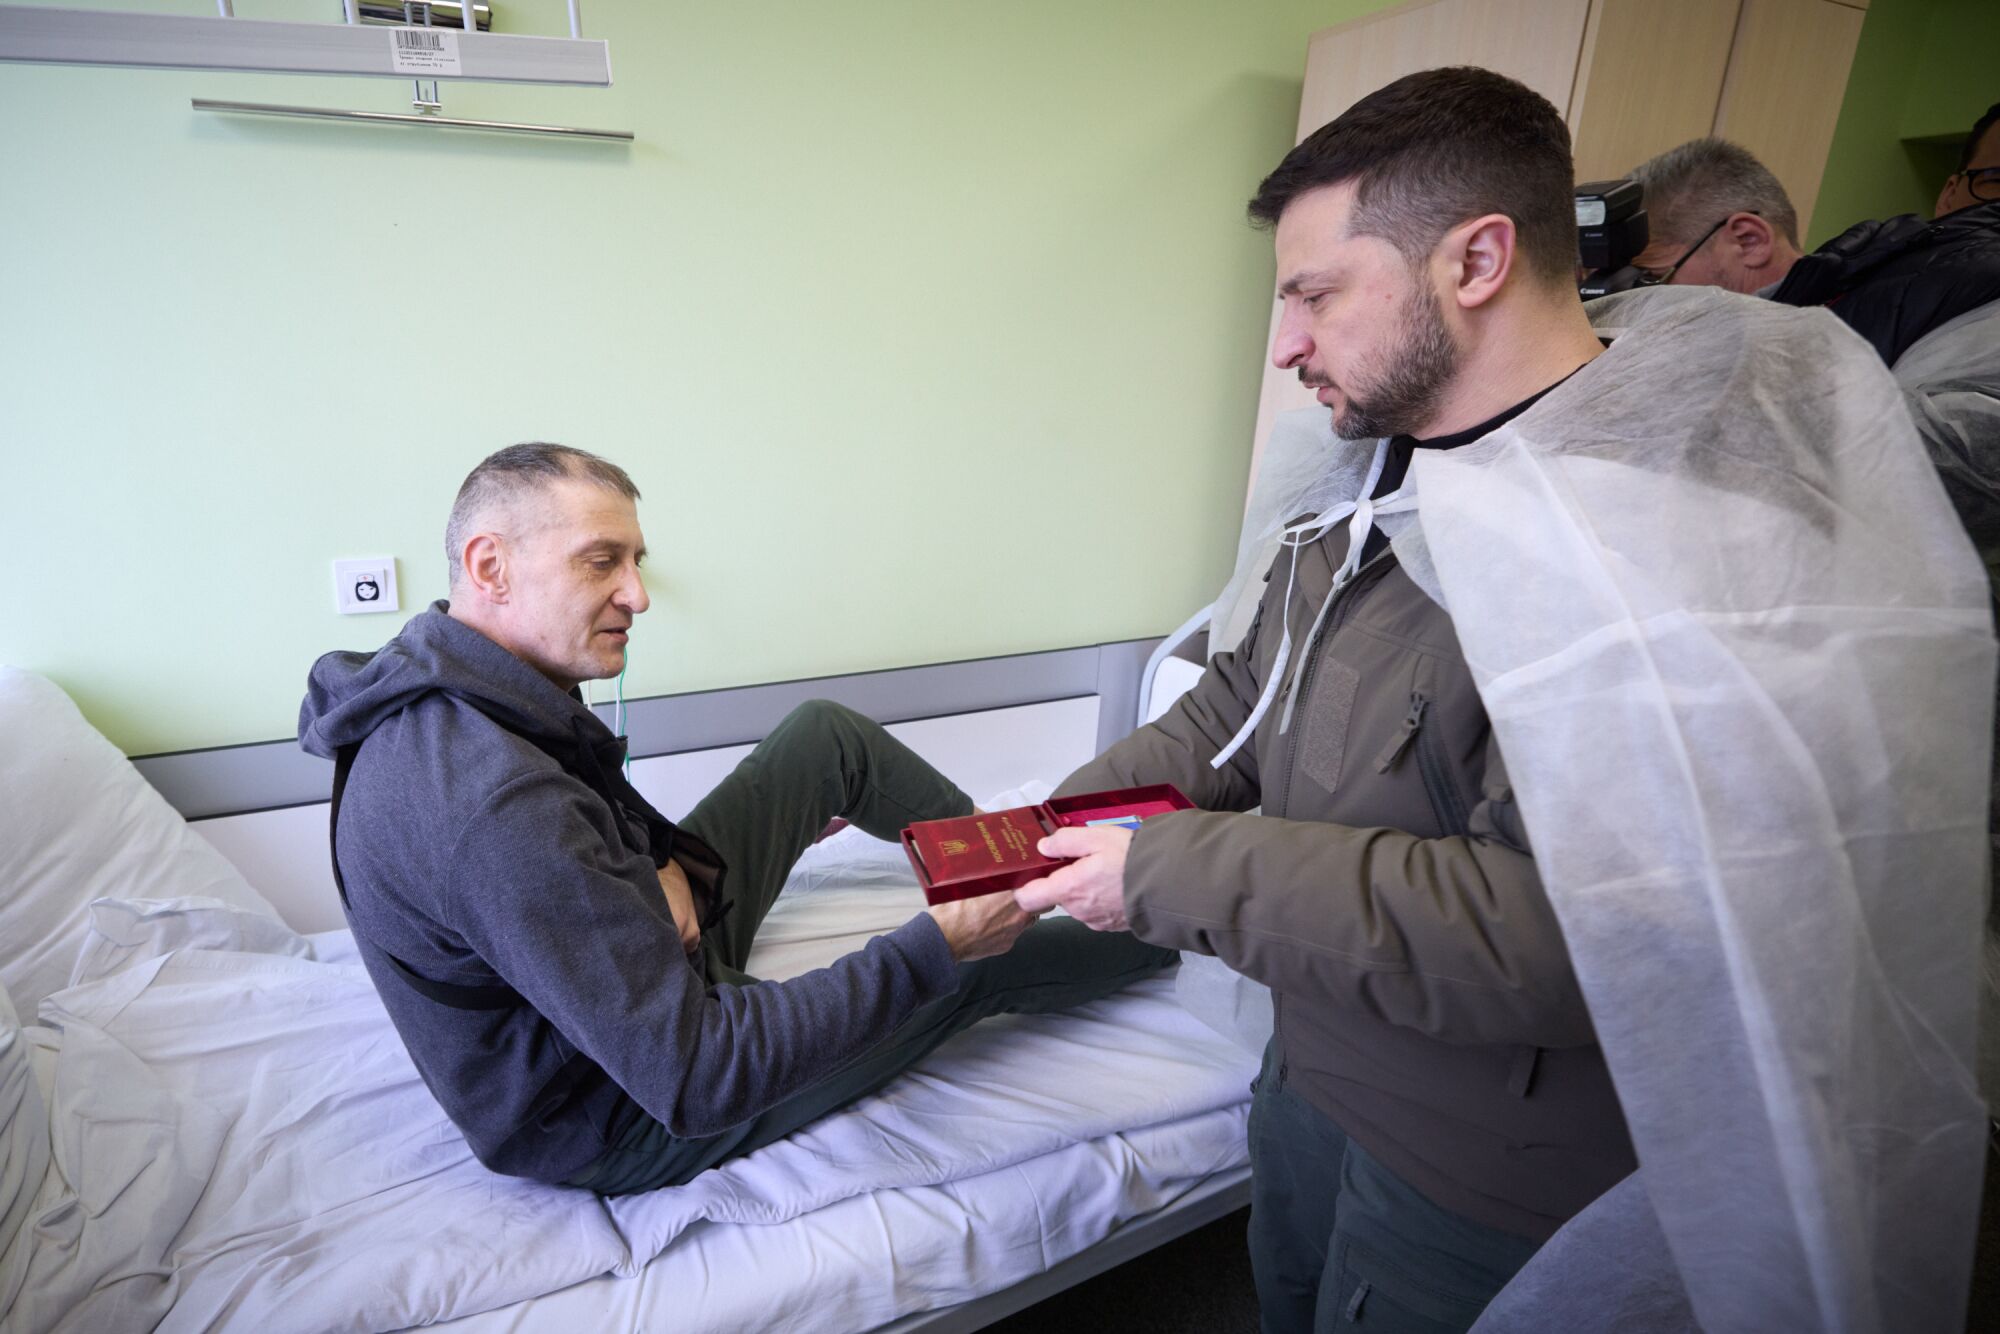 Ukrainian President Volodymyr Zelensky visits injured soldiers to hand out medals